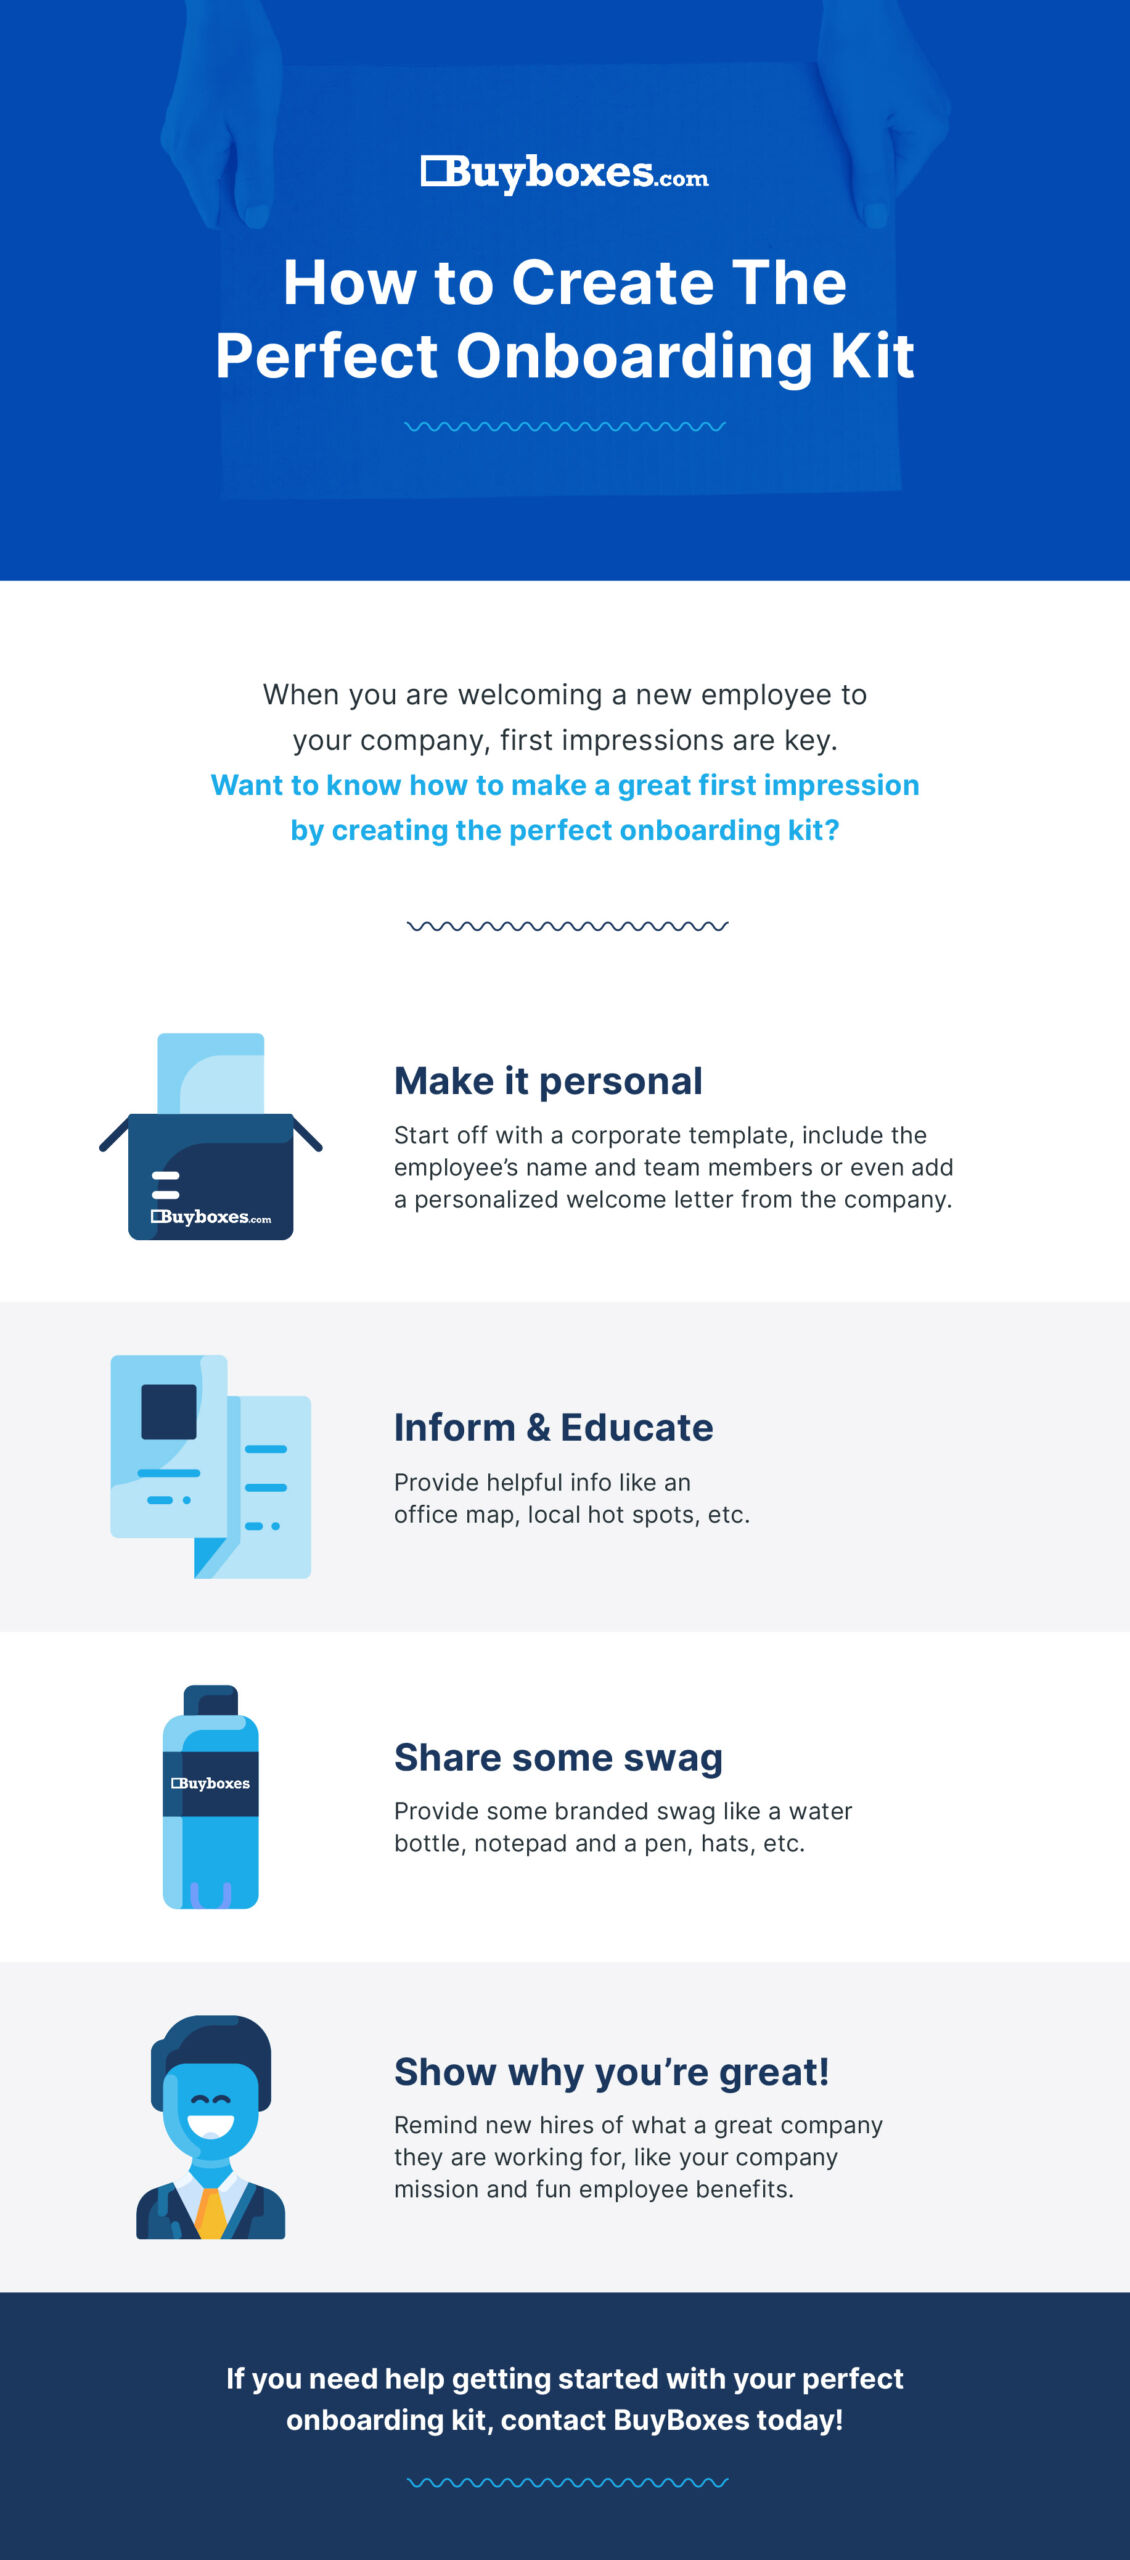 text saying to create the perfect onboarding kit by making it personal, informative and by including swag items